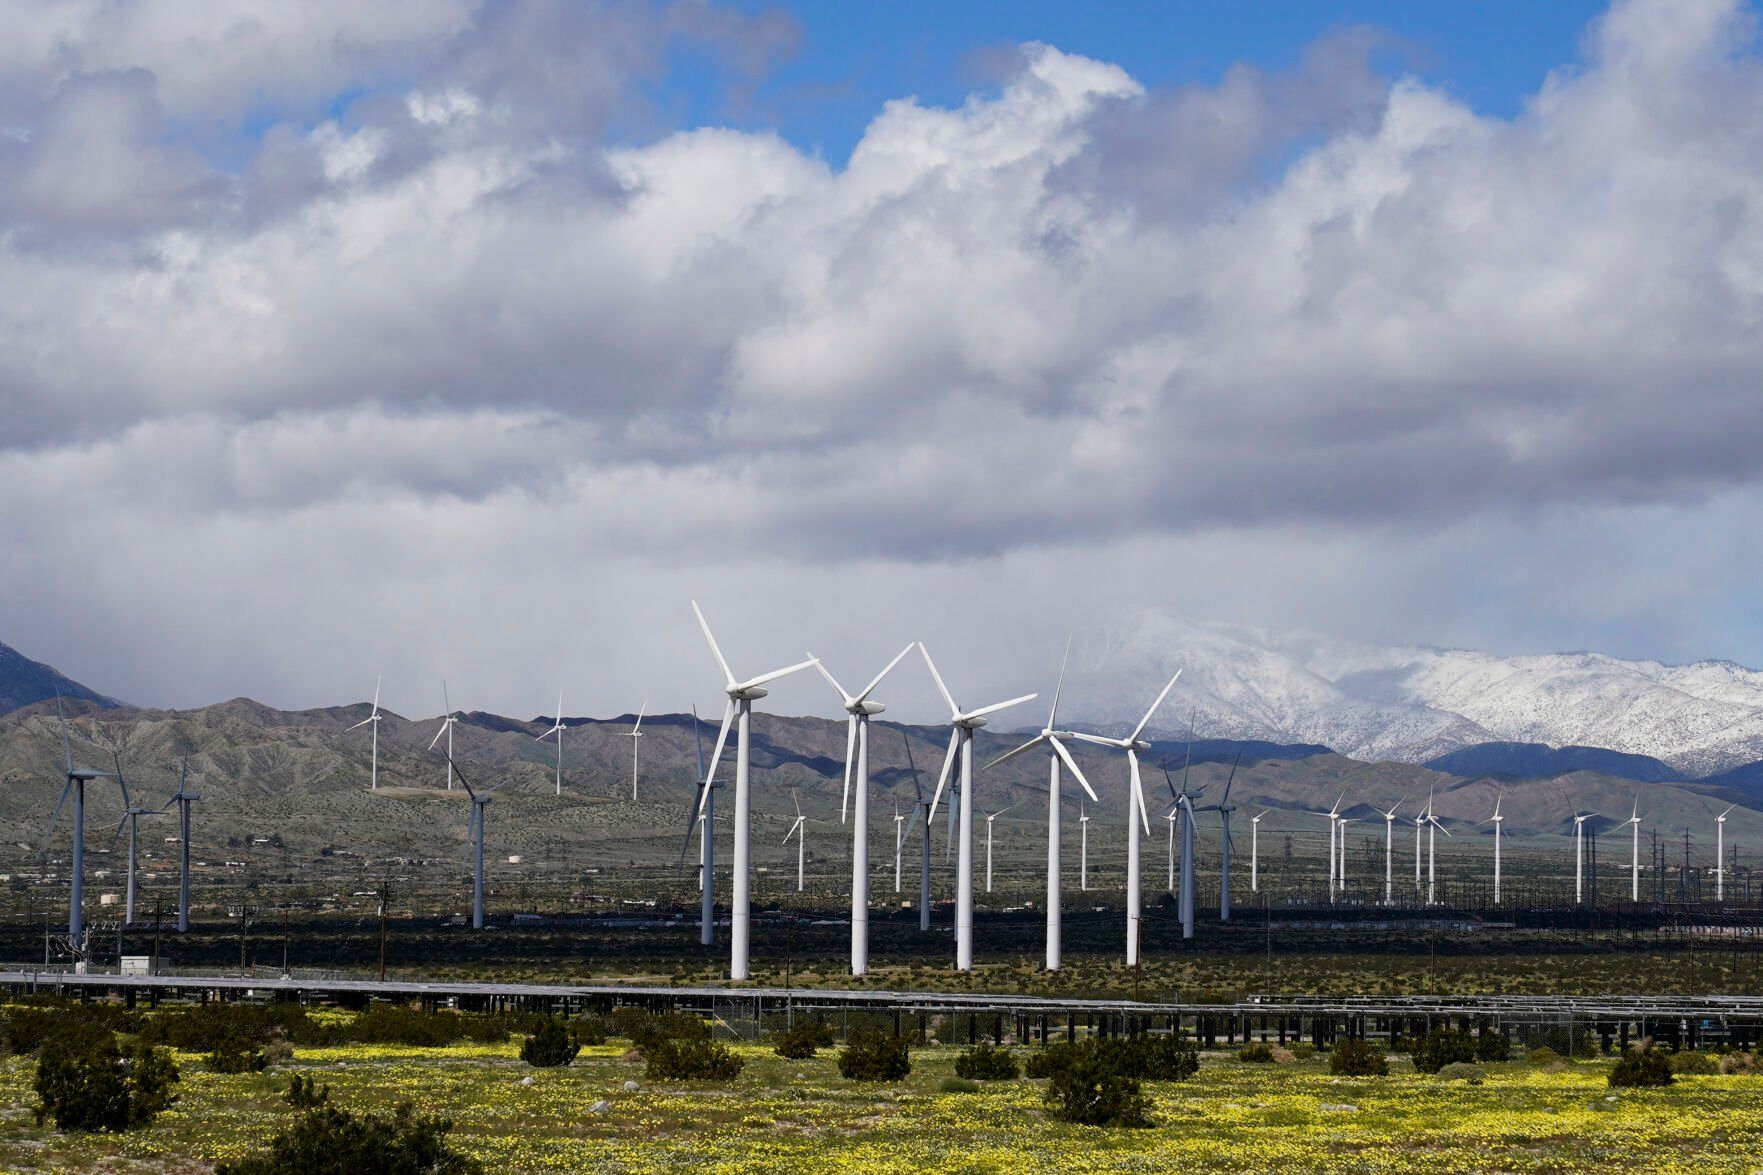 <p>FILE - Wind turbines stand in fields near Palm Springs, Calif, March 22, 2023. Electricity generated from renewables surpassed coal in the United States for the first time in 2022, the U.S. Energy Information Administration announced Monday, March 27, 2023. (AP Photo/Ashley Landis, File)</p>   PHOTO CREDIT: Ashley Landis 